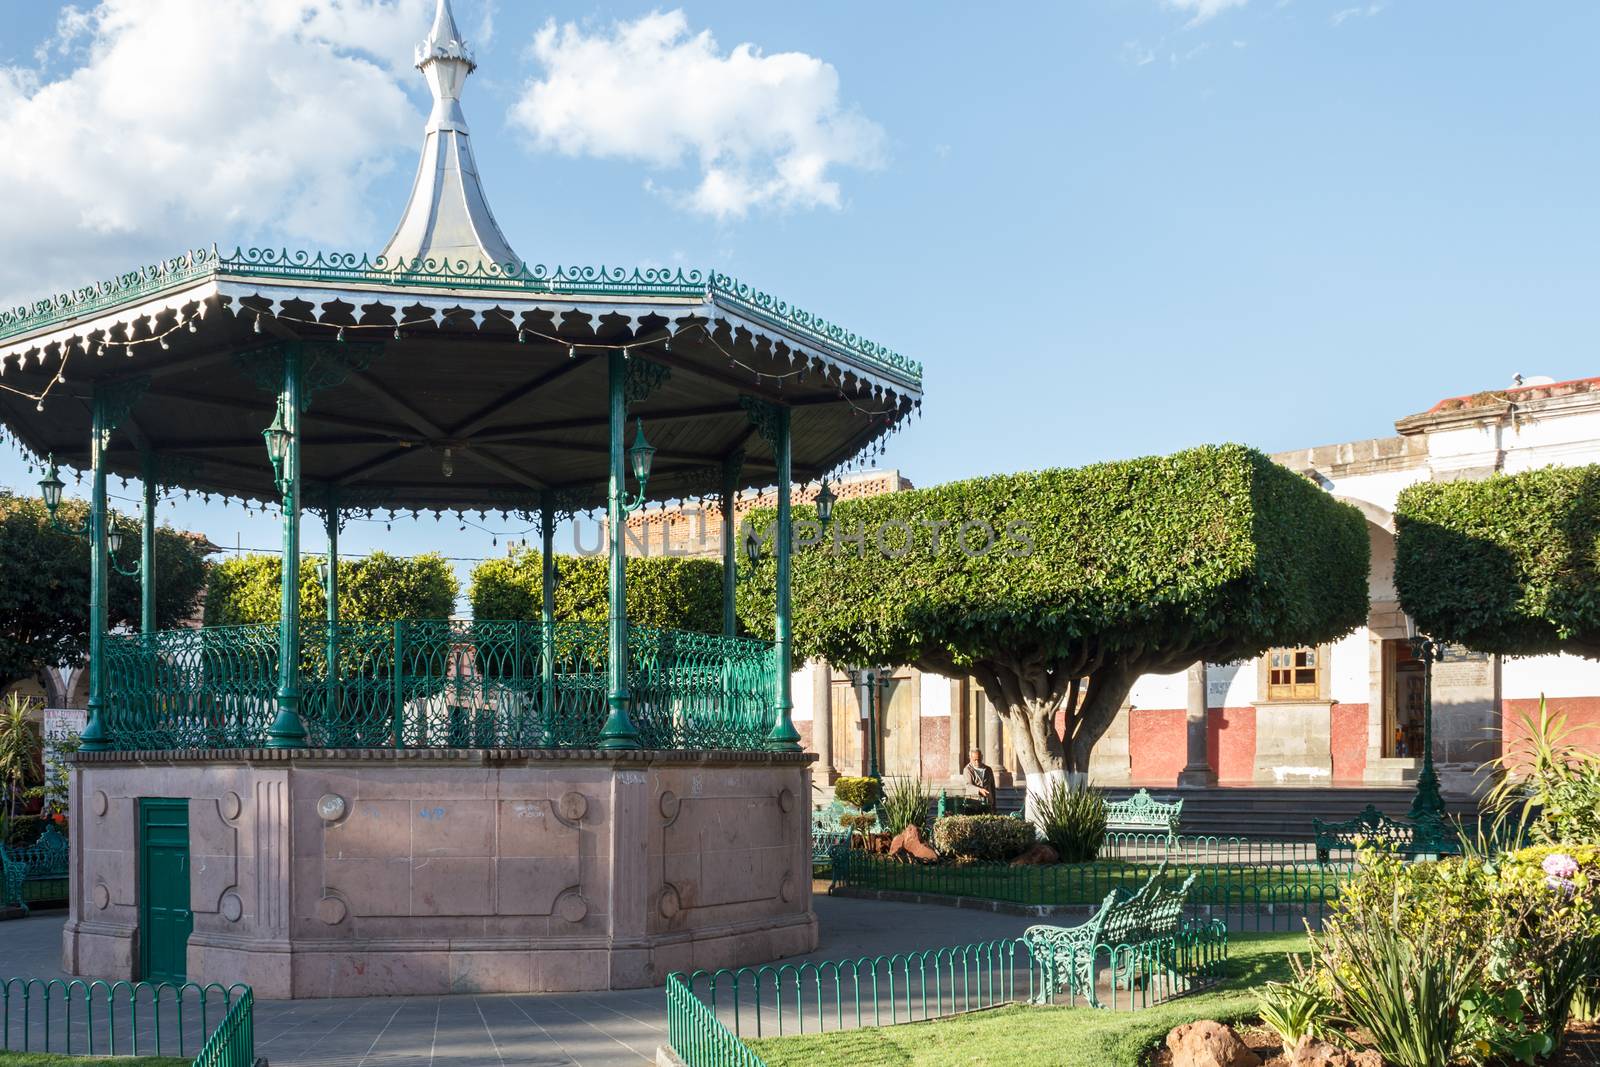 Gazebo at a plaza in Quiroga Mexico by lprising